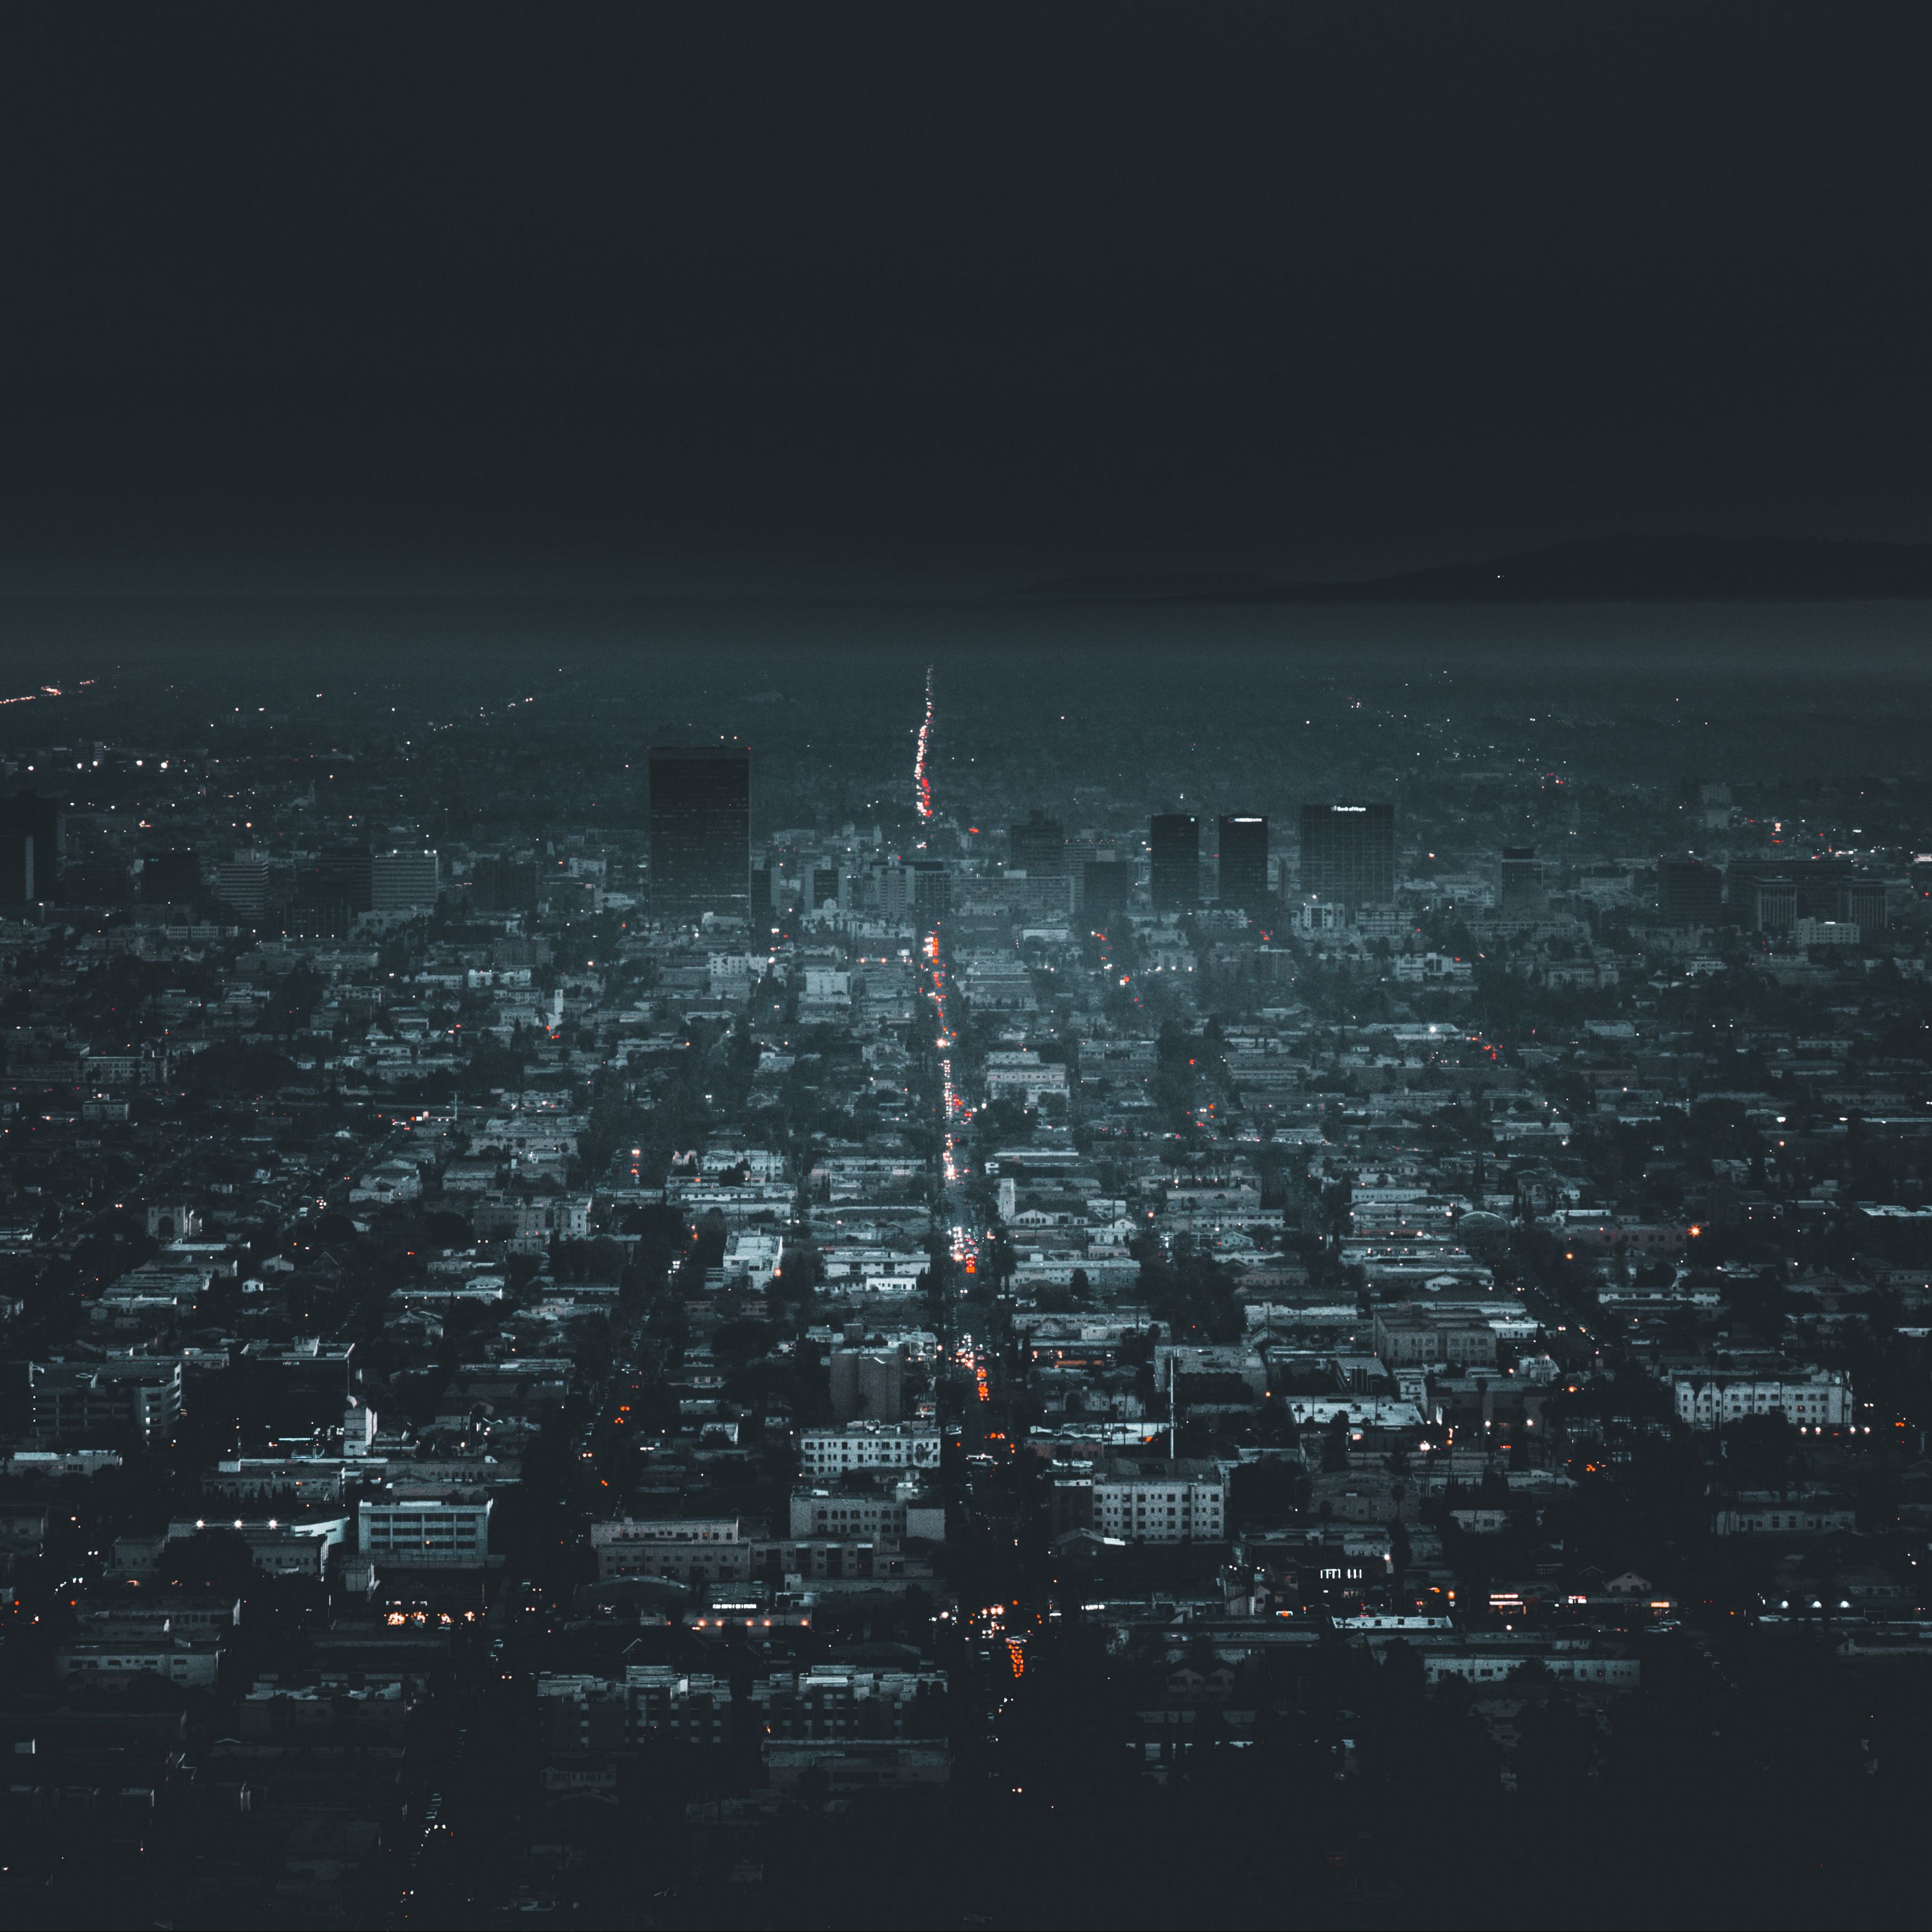 Download wallpaper 3415x3415 night city, aerial view, city lights, los angeles, usa ipad pro 12.9 retina for parallax HD background